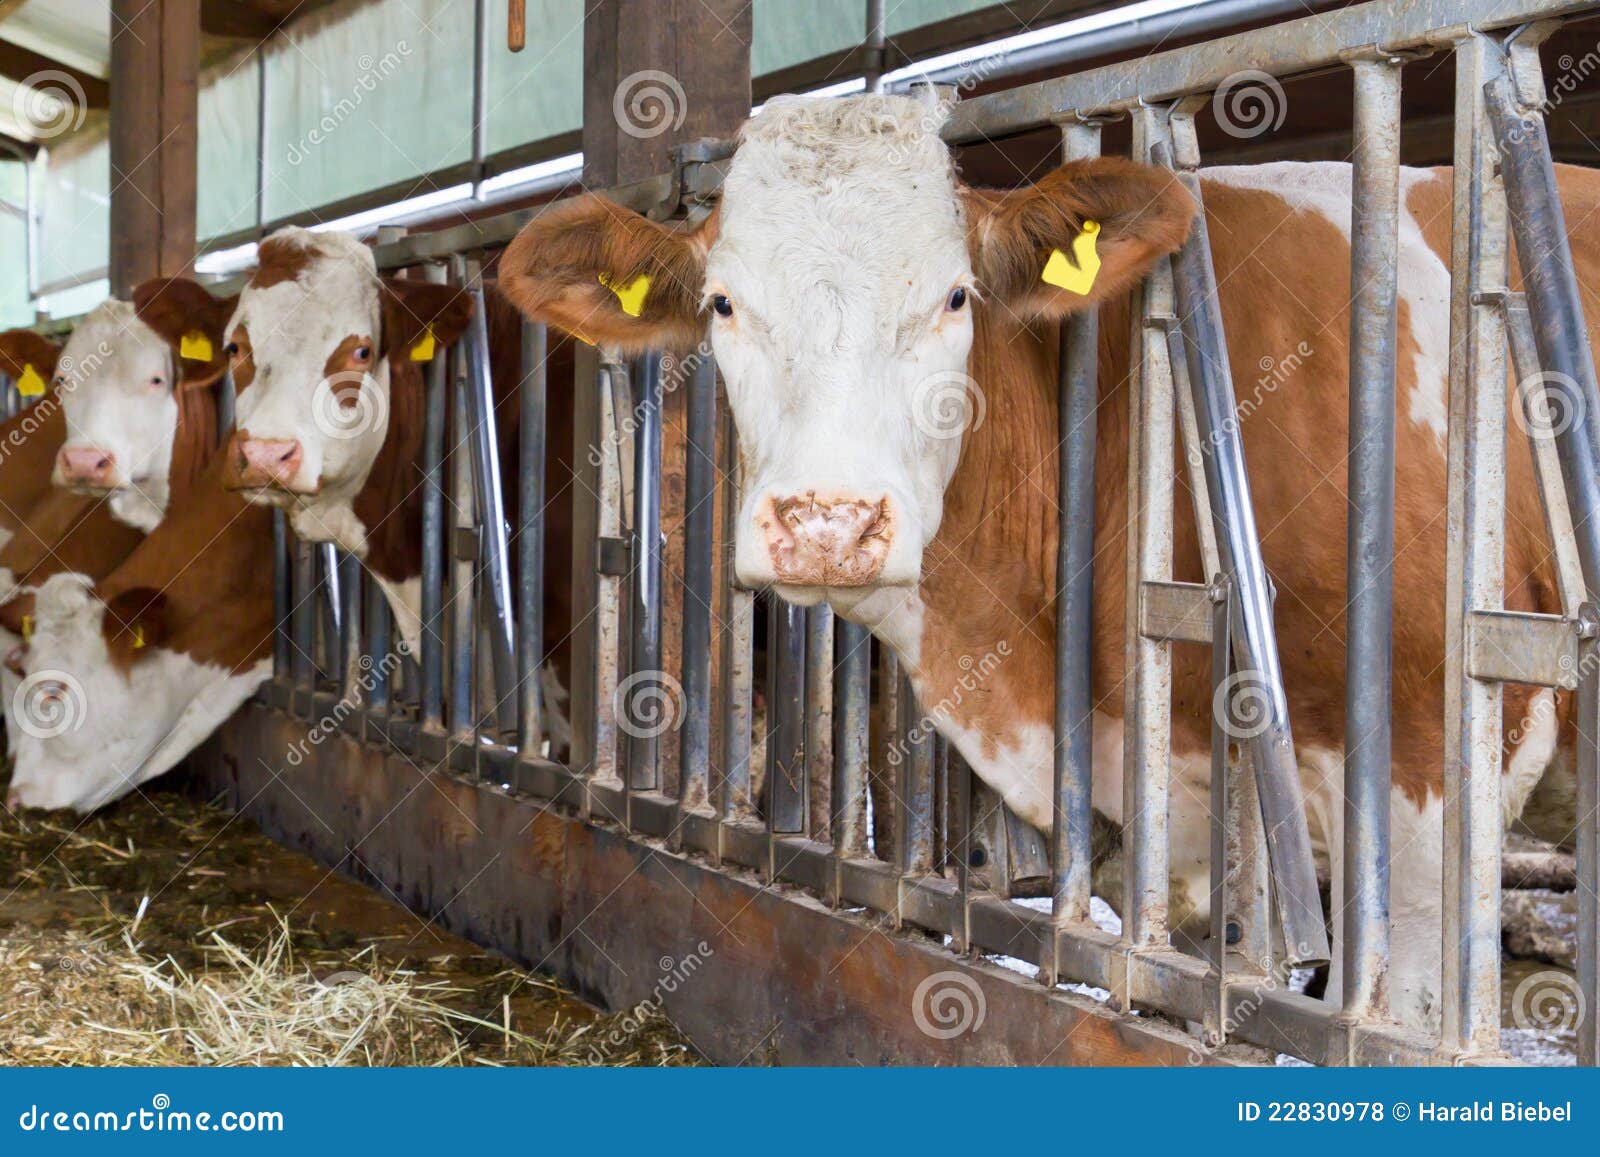 Cows in a cow shed stock photo. Image of snout, animal 